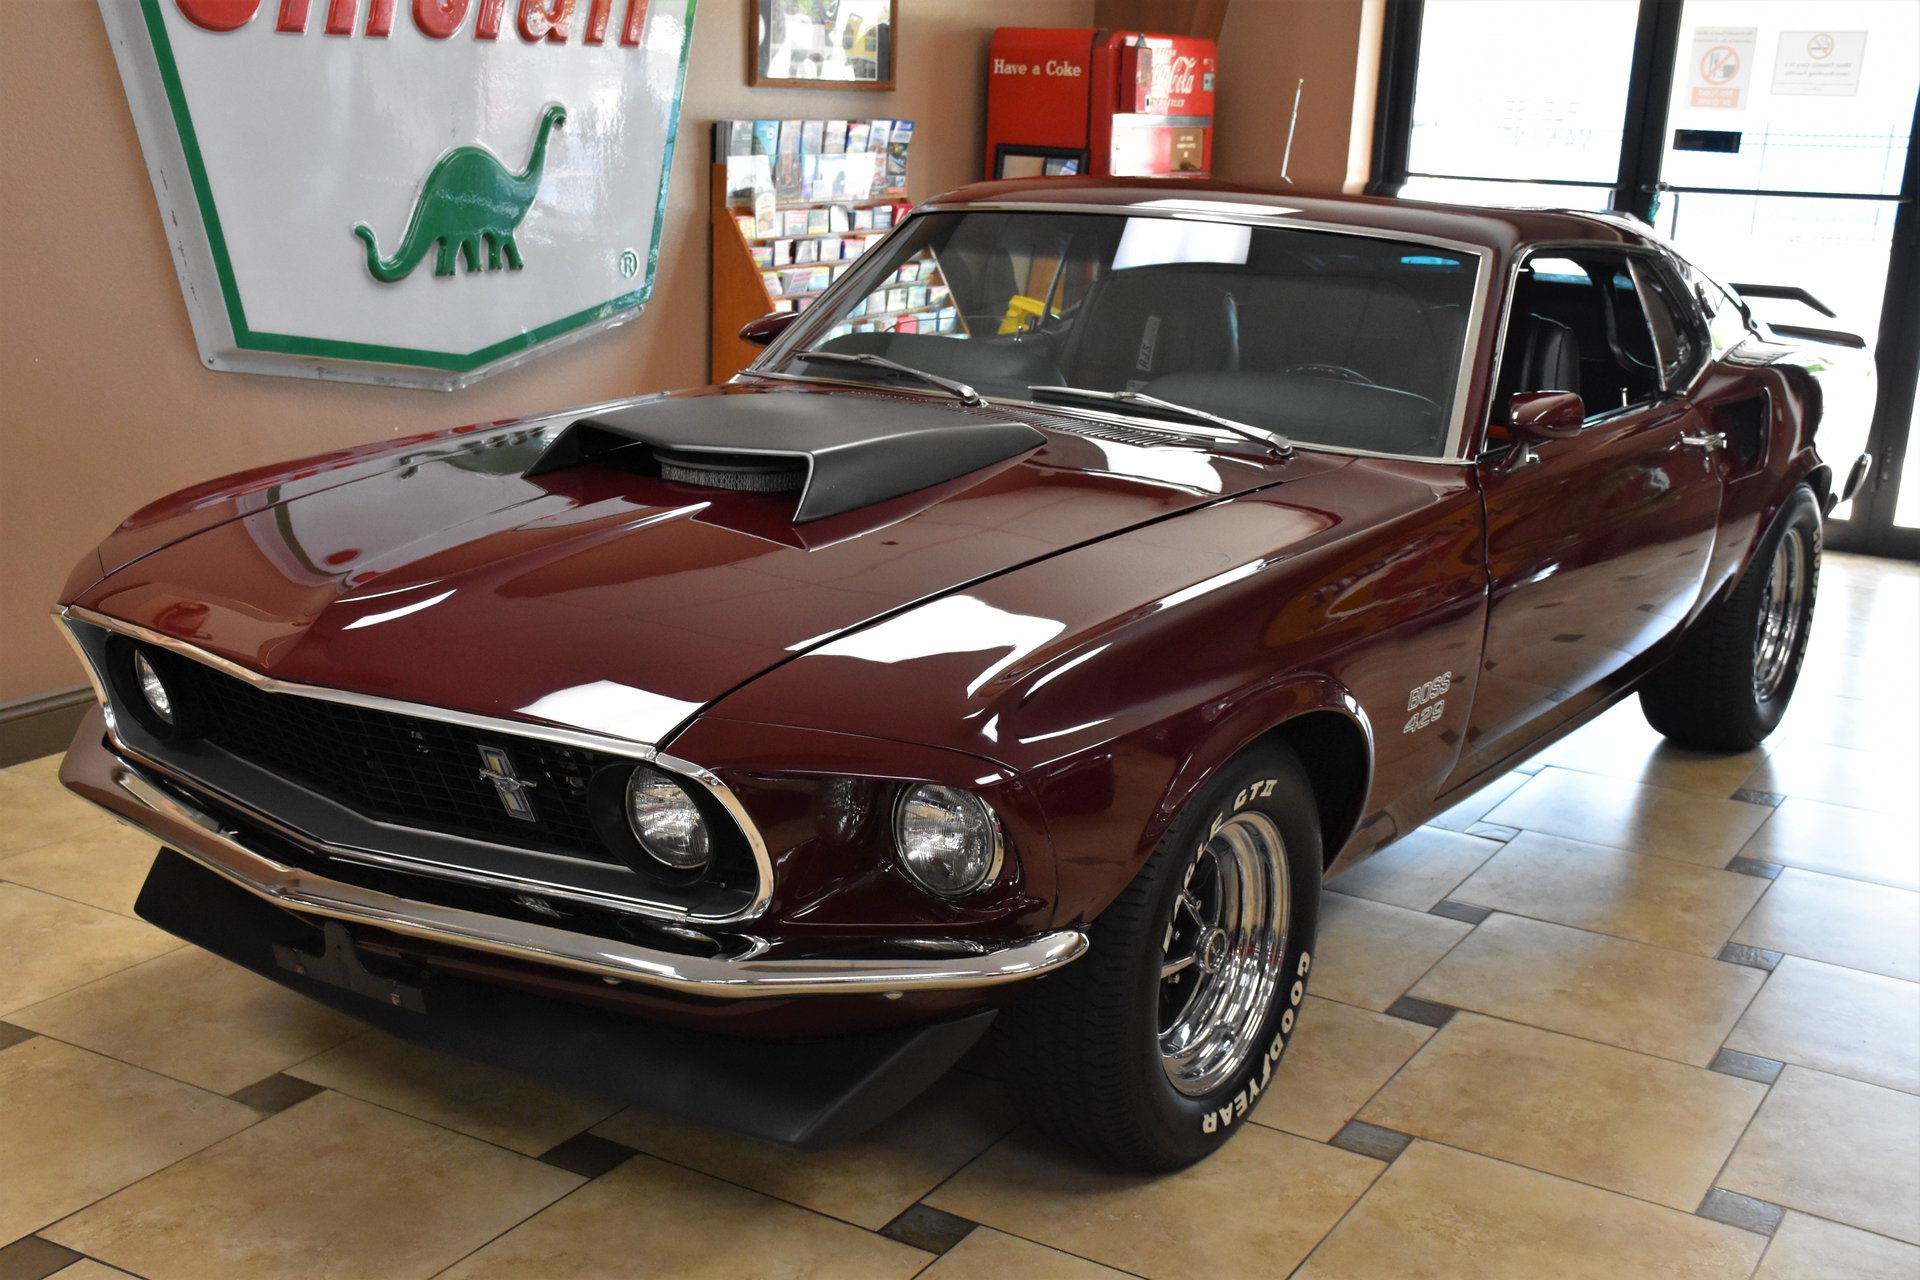 Incredibly rare 1969 Boss 429 Found In Florida Mint Drag ready 